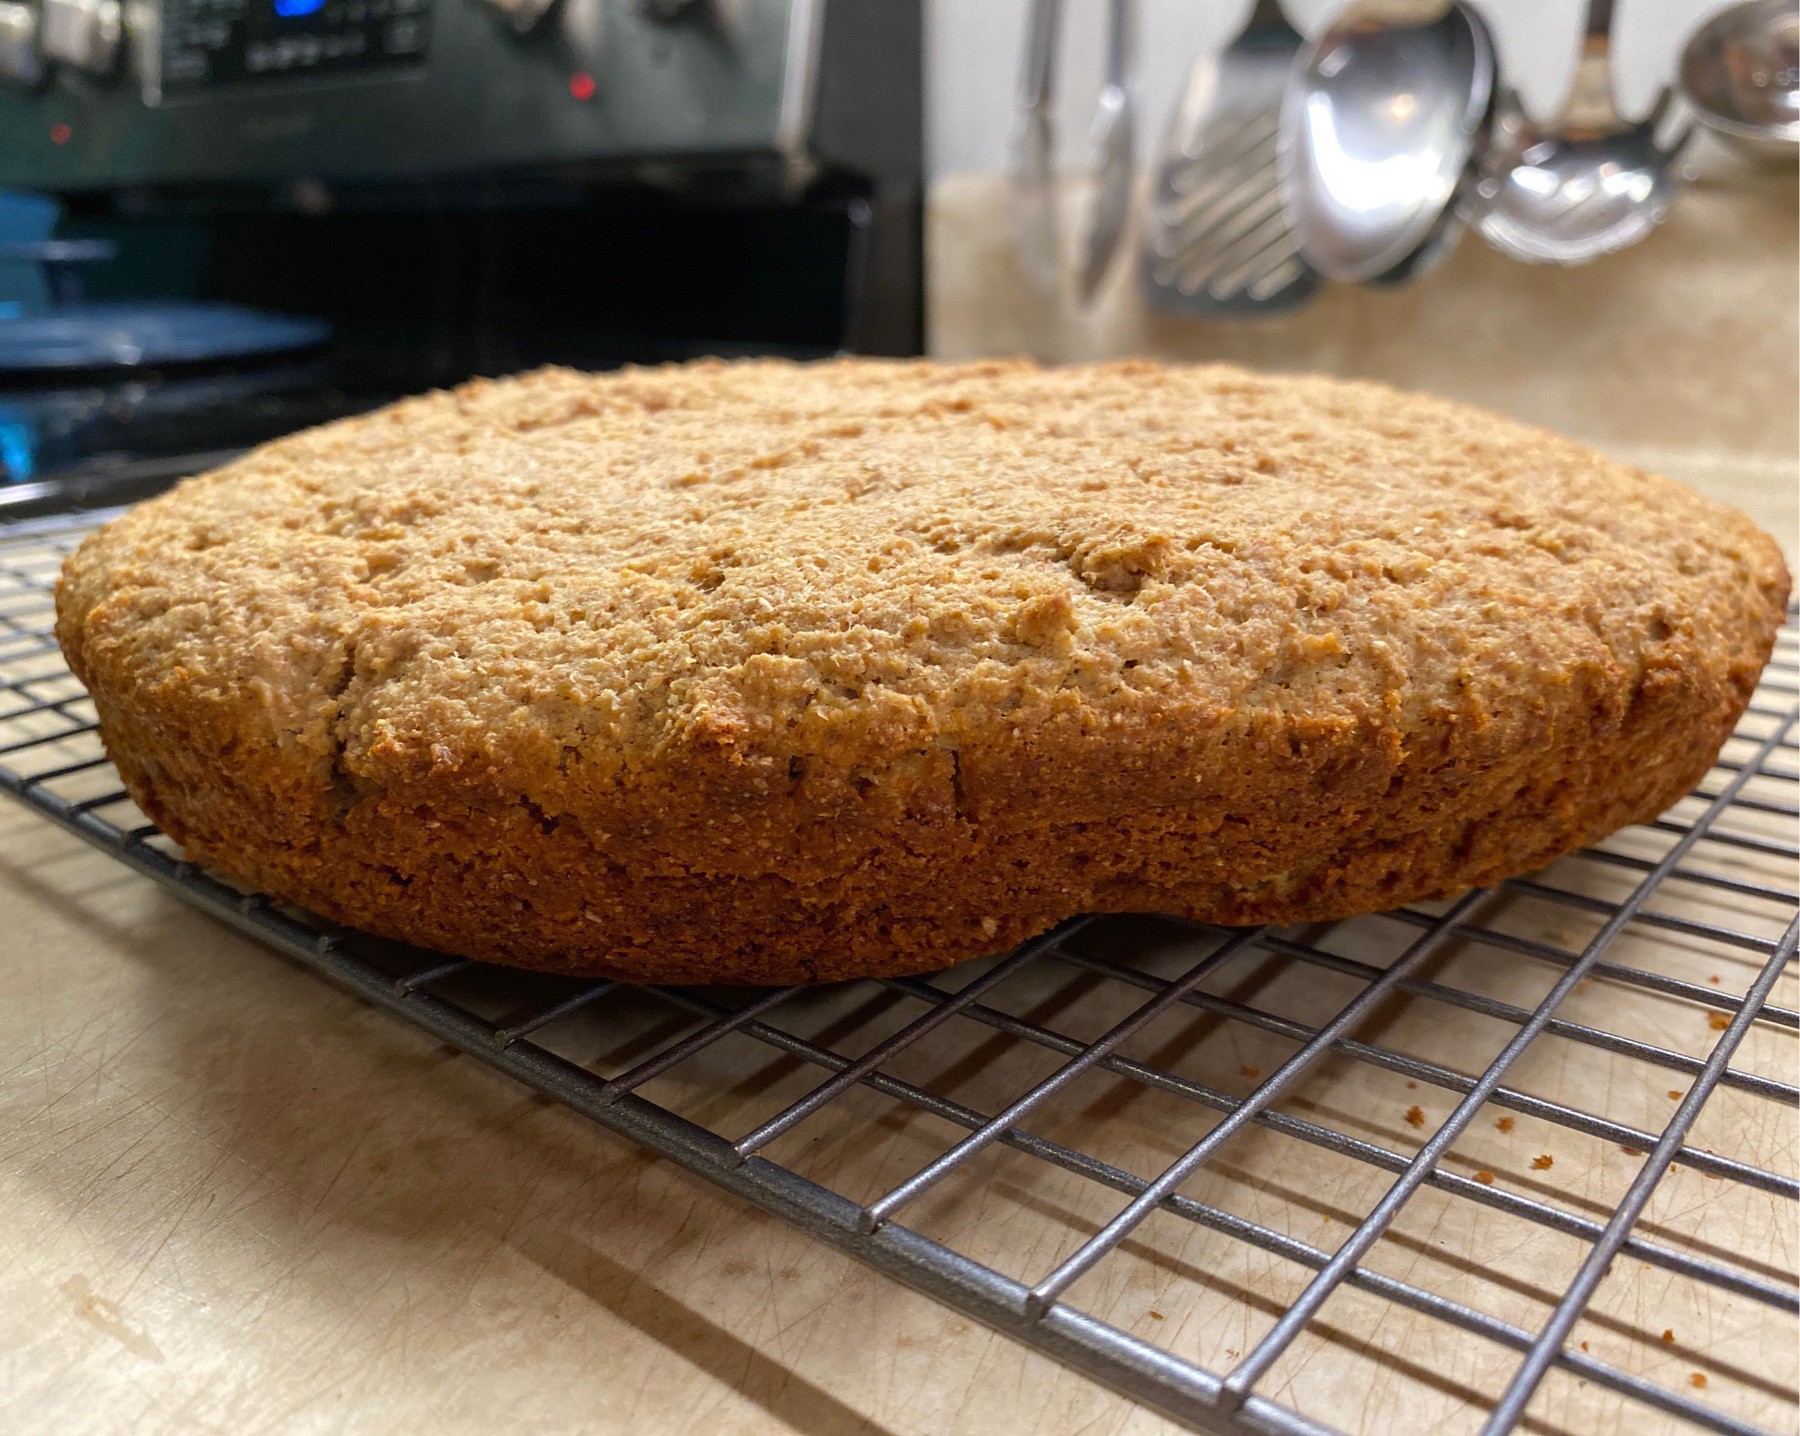 Brown bread cooling on rack.